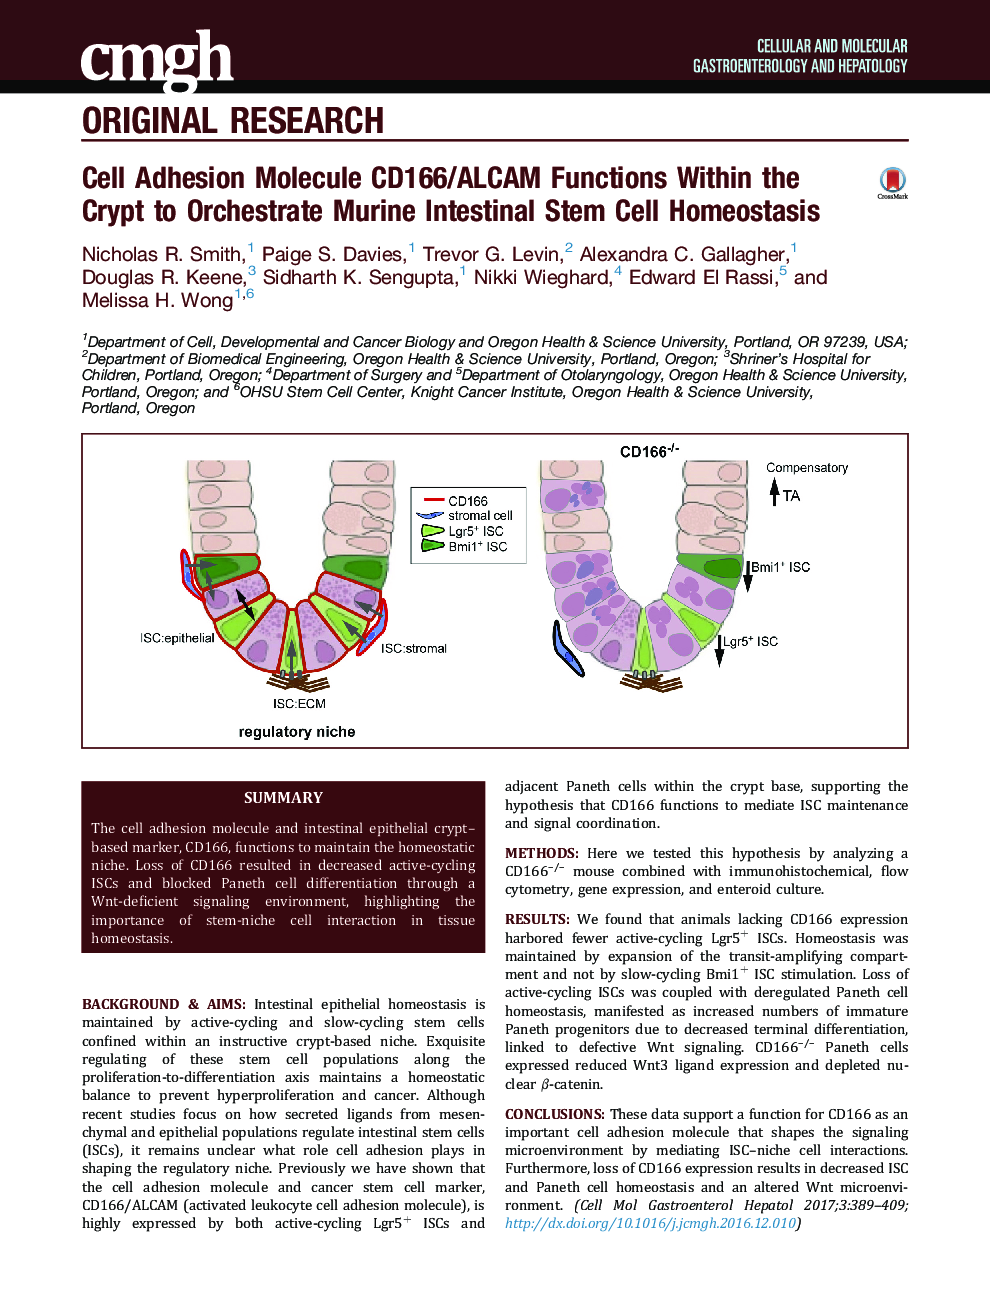 Cell Adhesion Molecule CD166/ALCAM Functions Within the Crypt to Orchestrate Murine Intestinal Stem Cell Homeostasis